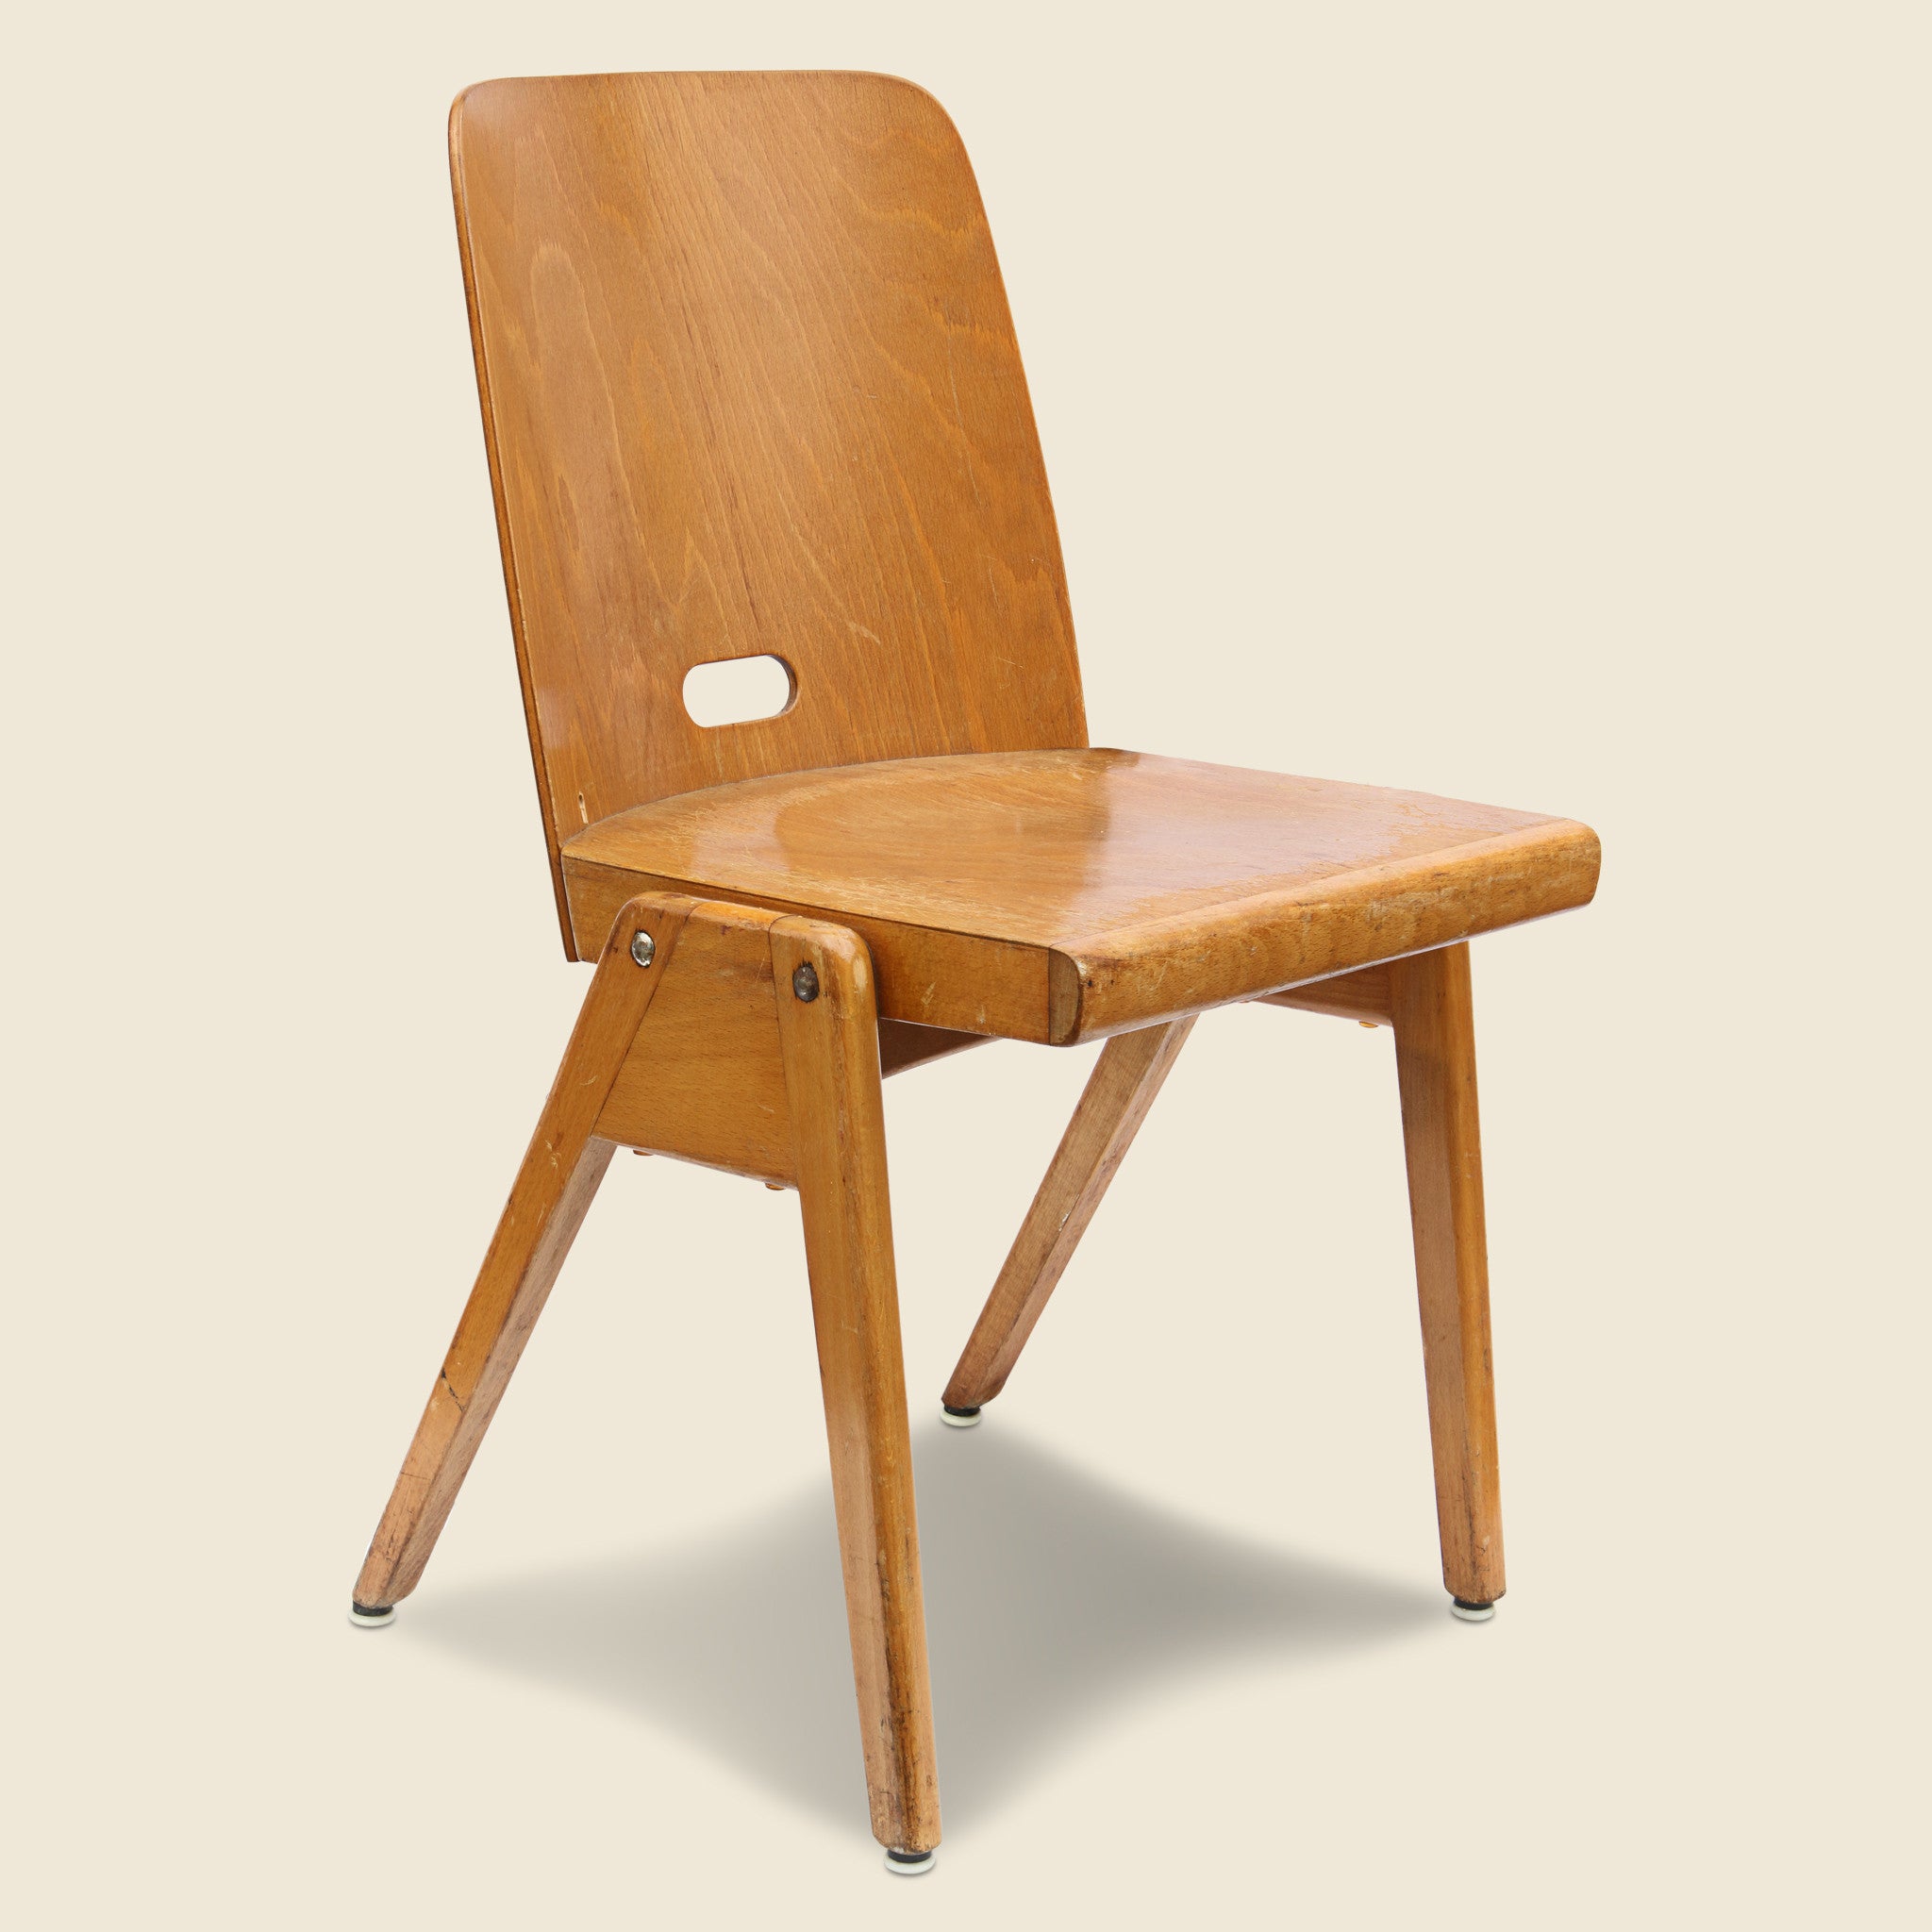 english industrial plywood chair 2